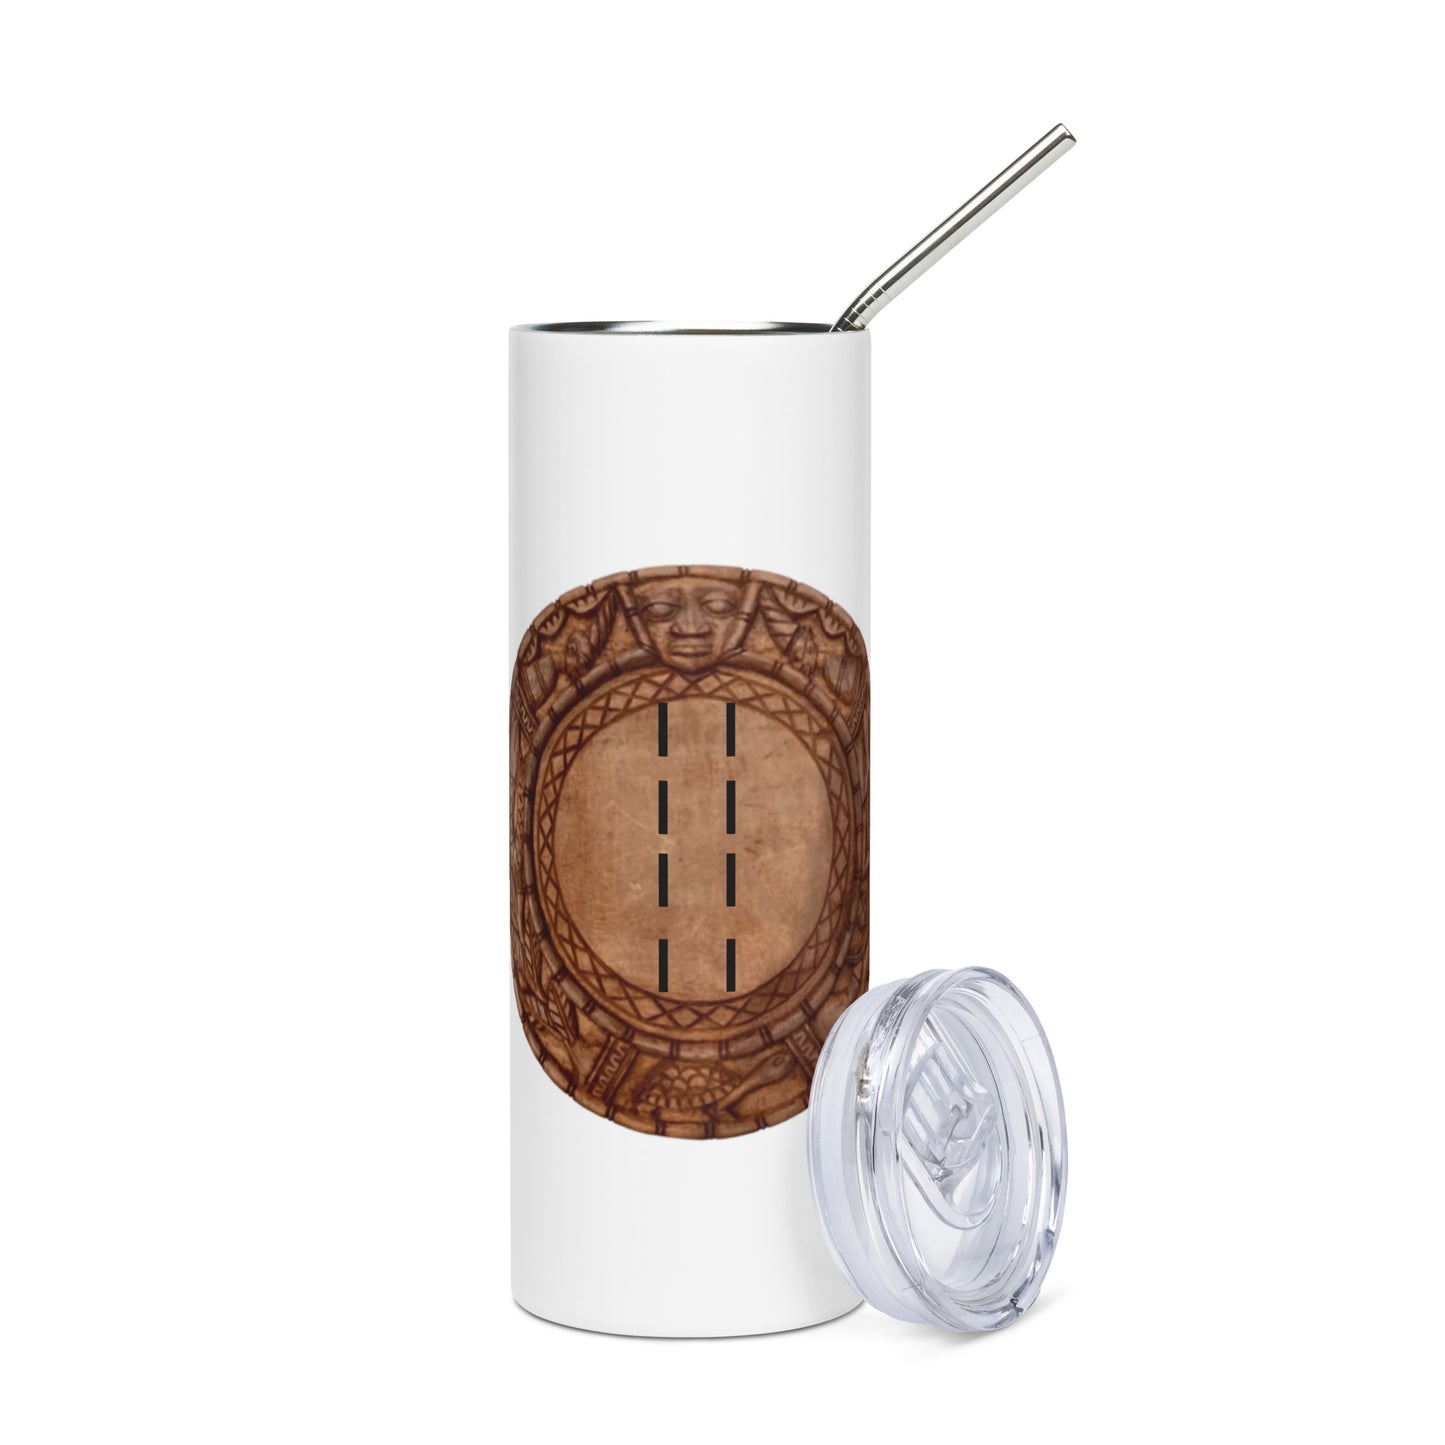 Opon IFA (with Odu) Stainless Steel Tumbler